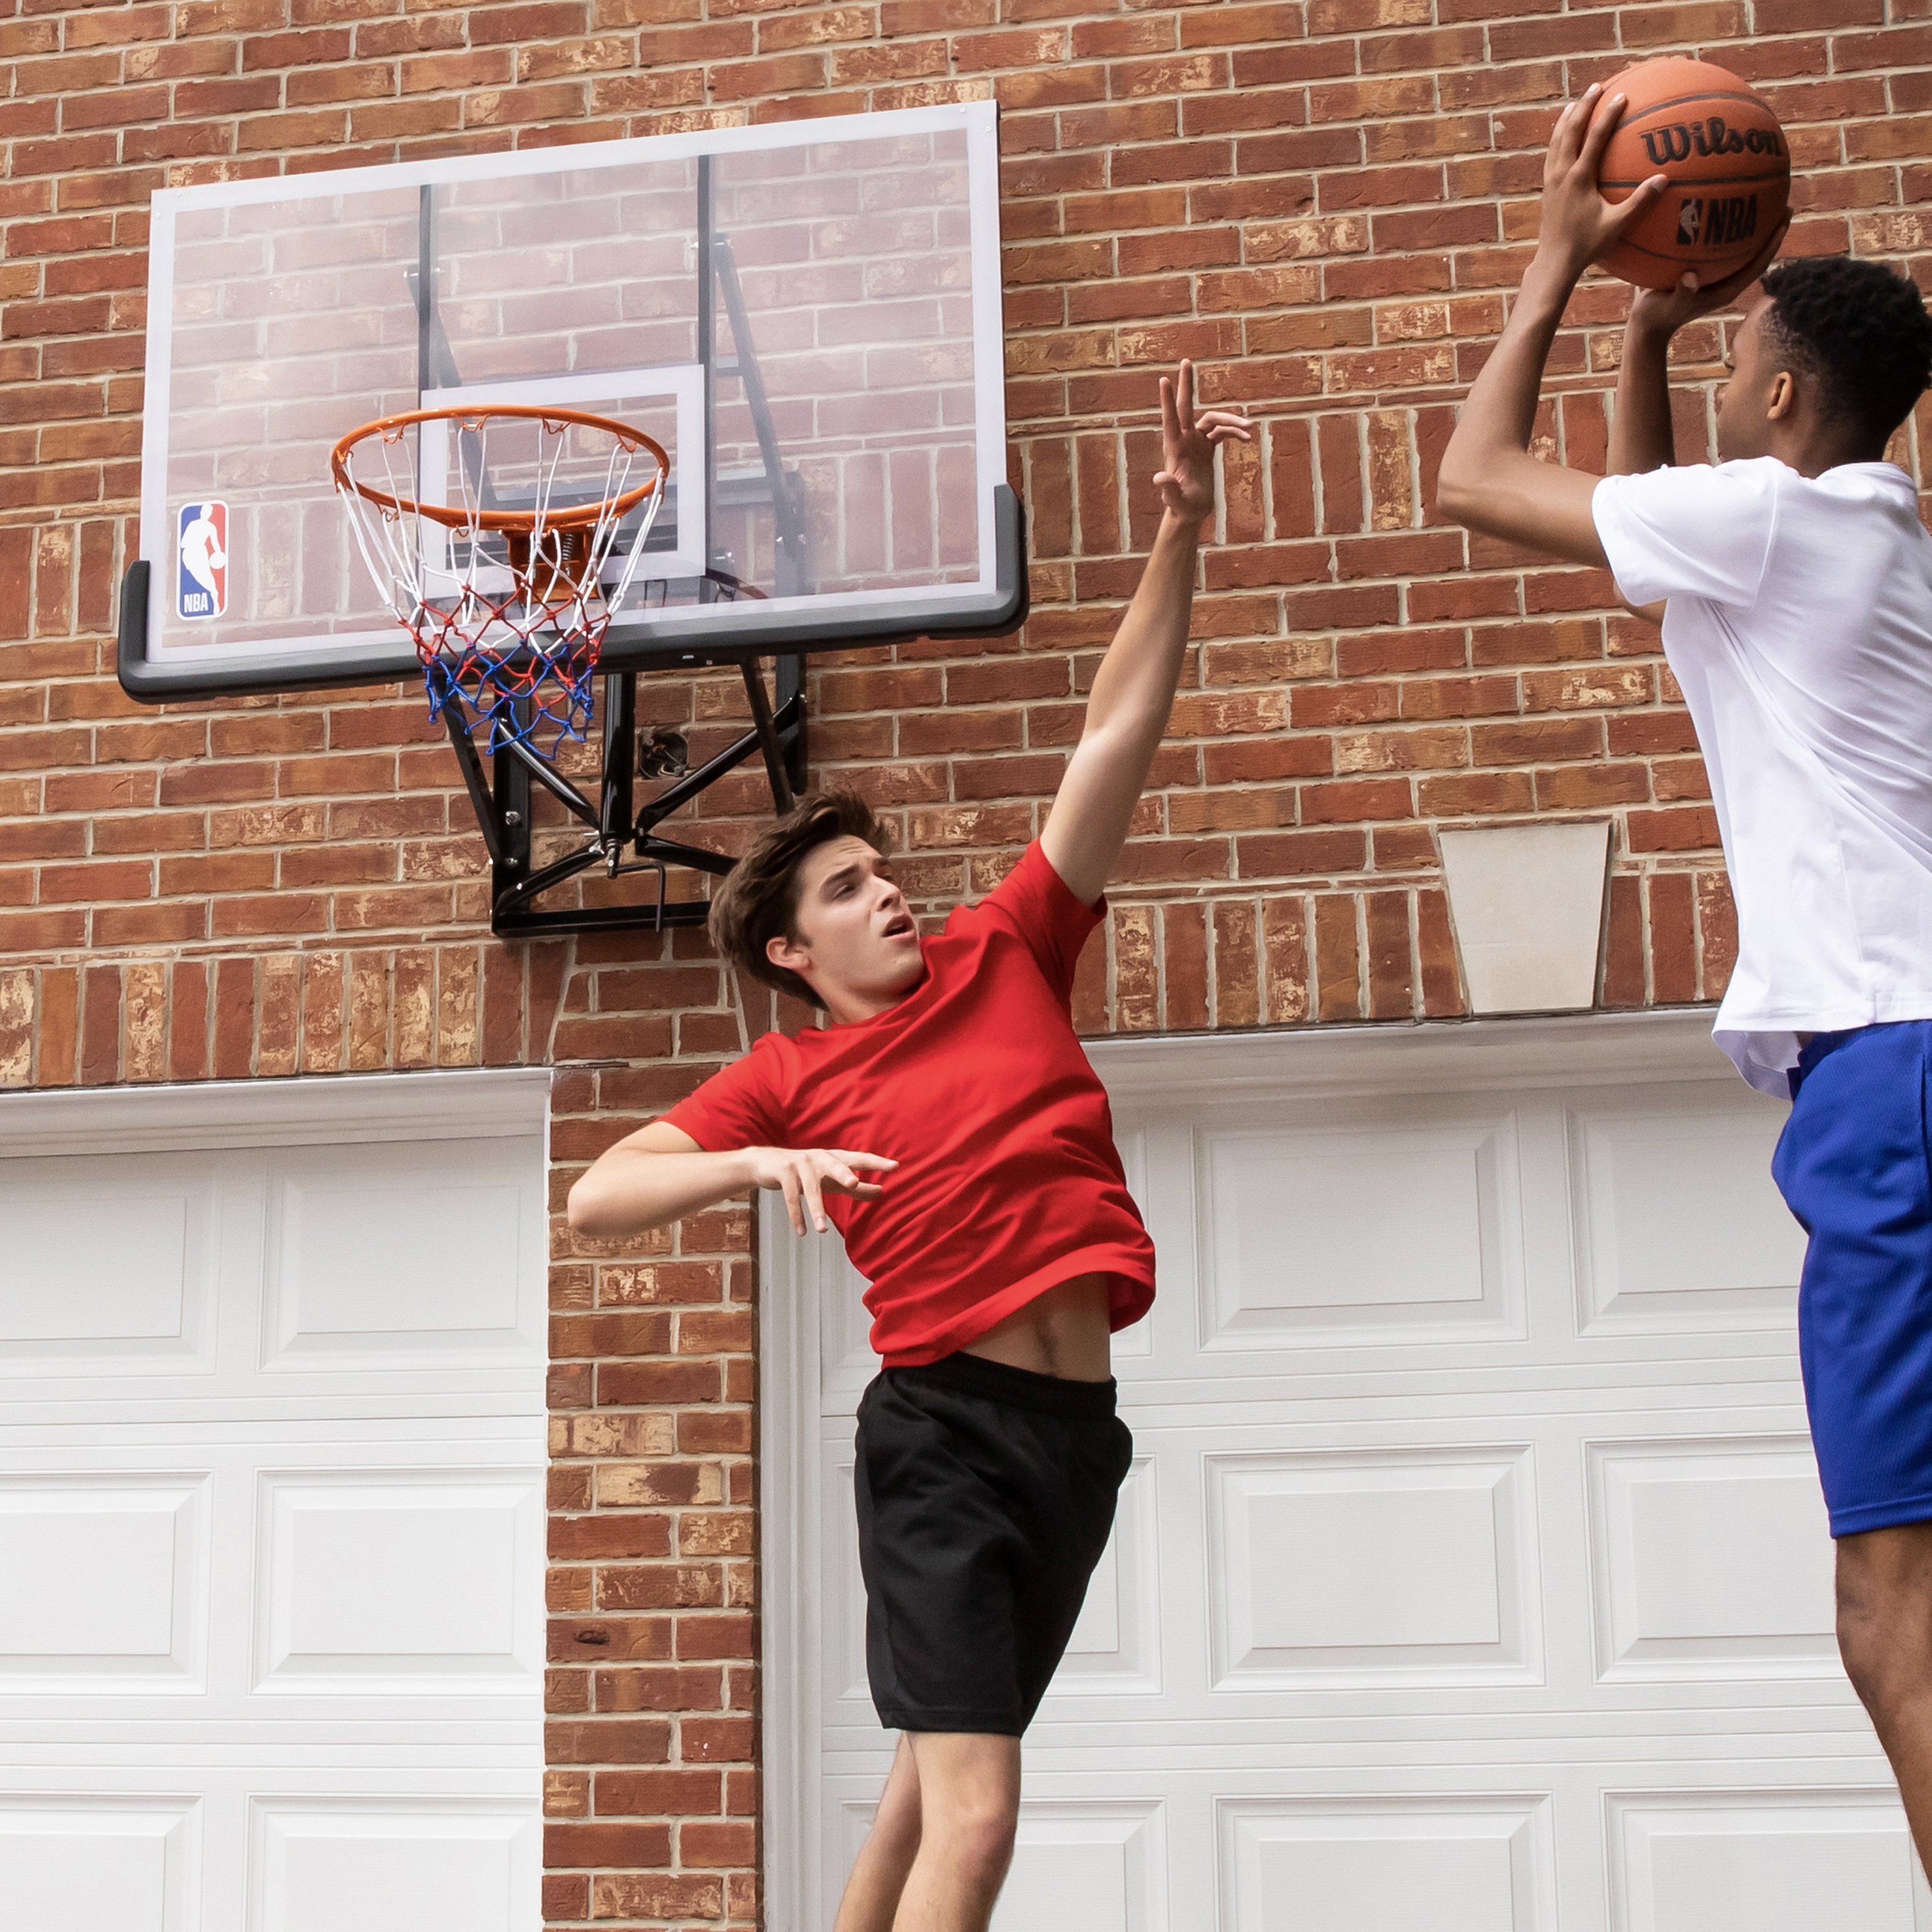 NBA Official 54 In. Wall-Mounted Basketball Hoop with Polycarbonate Backboard - image 9 of 9